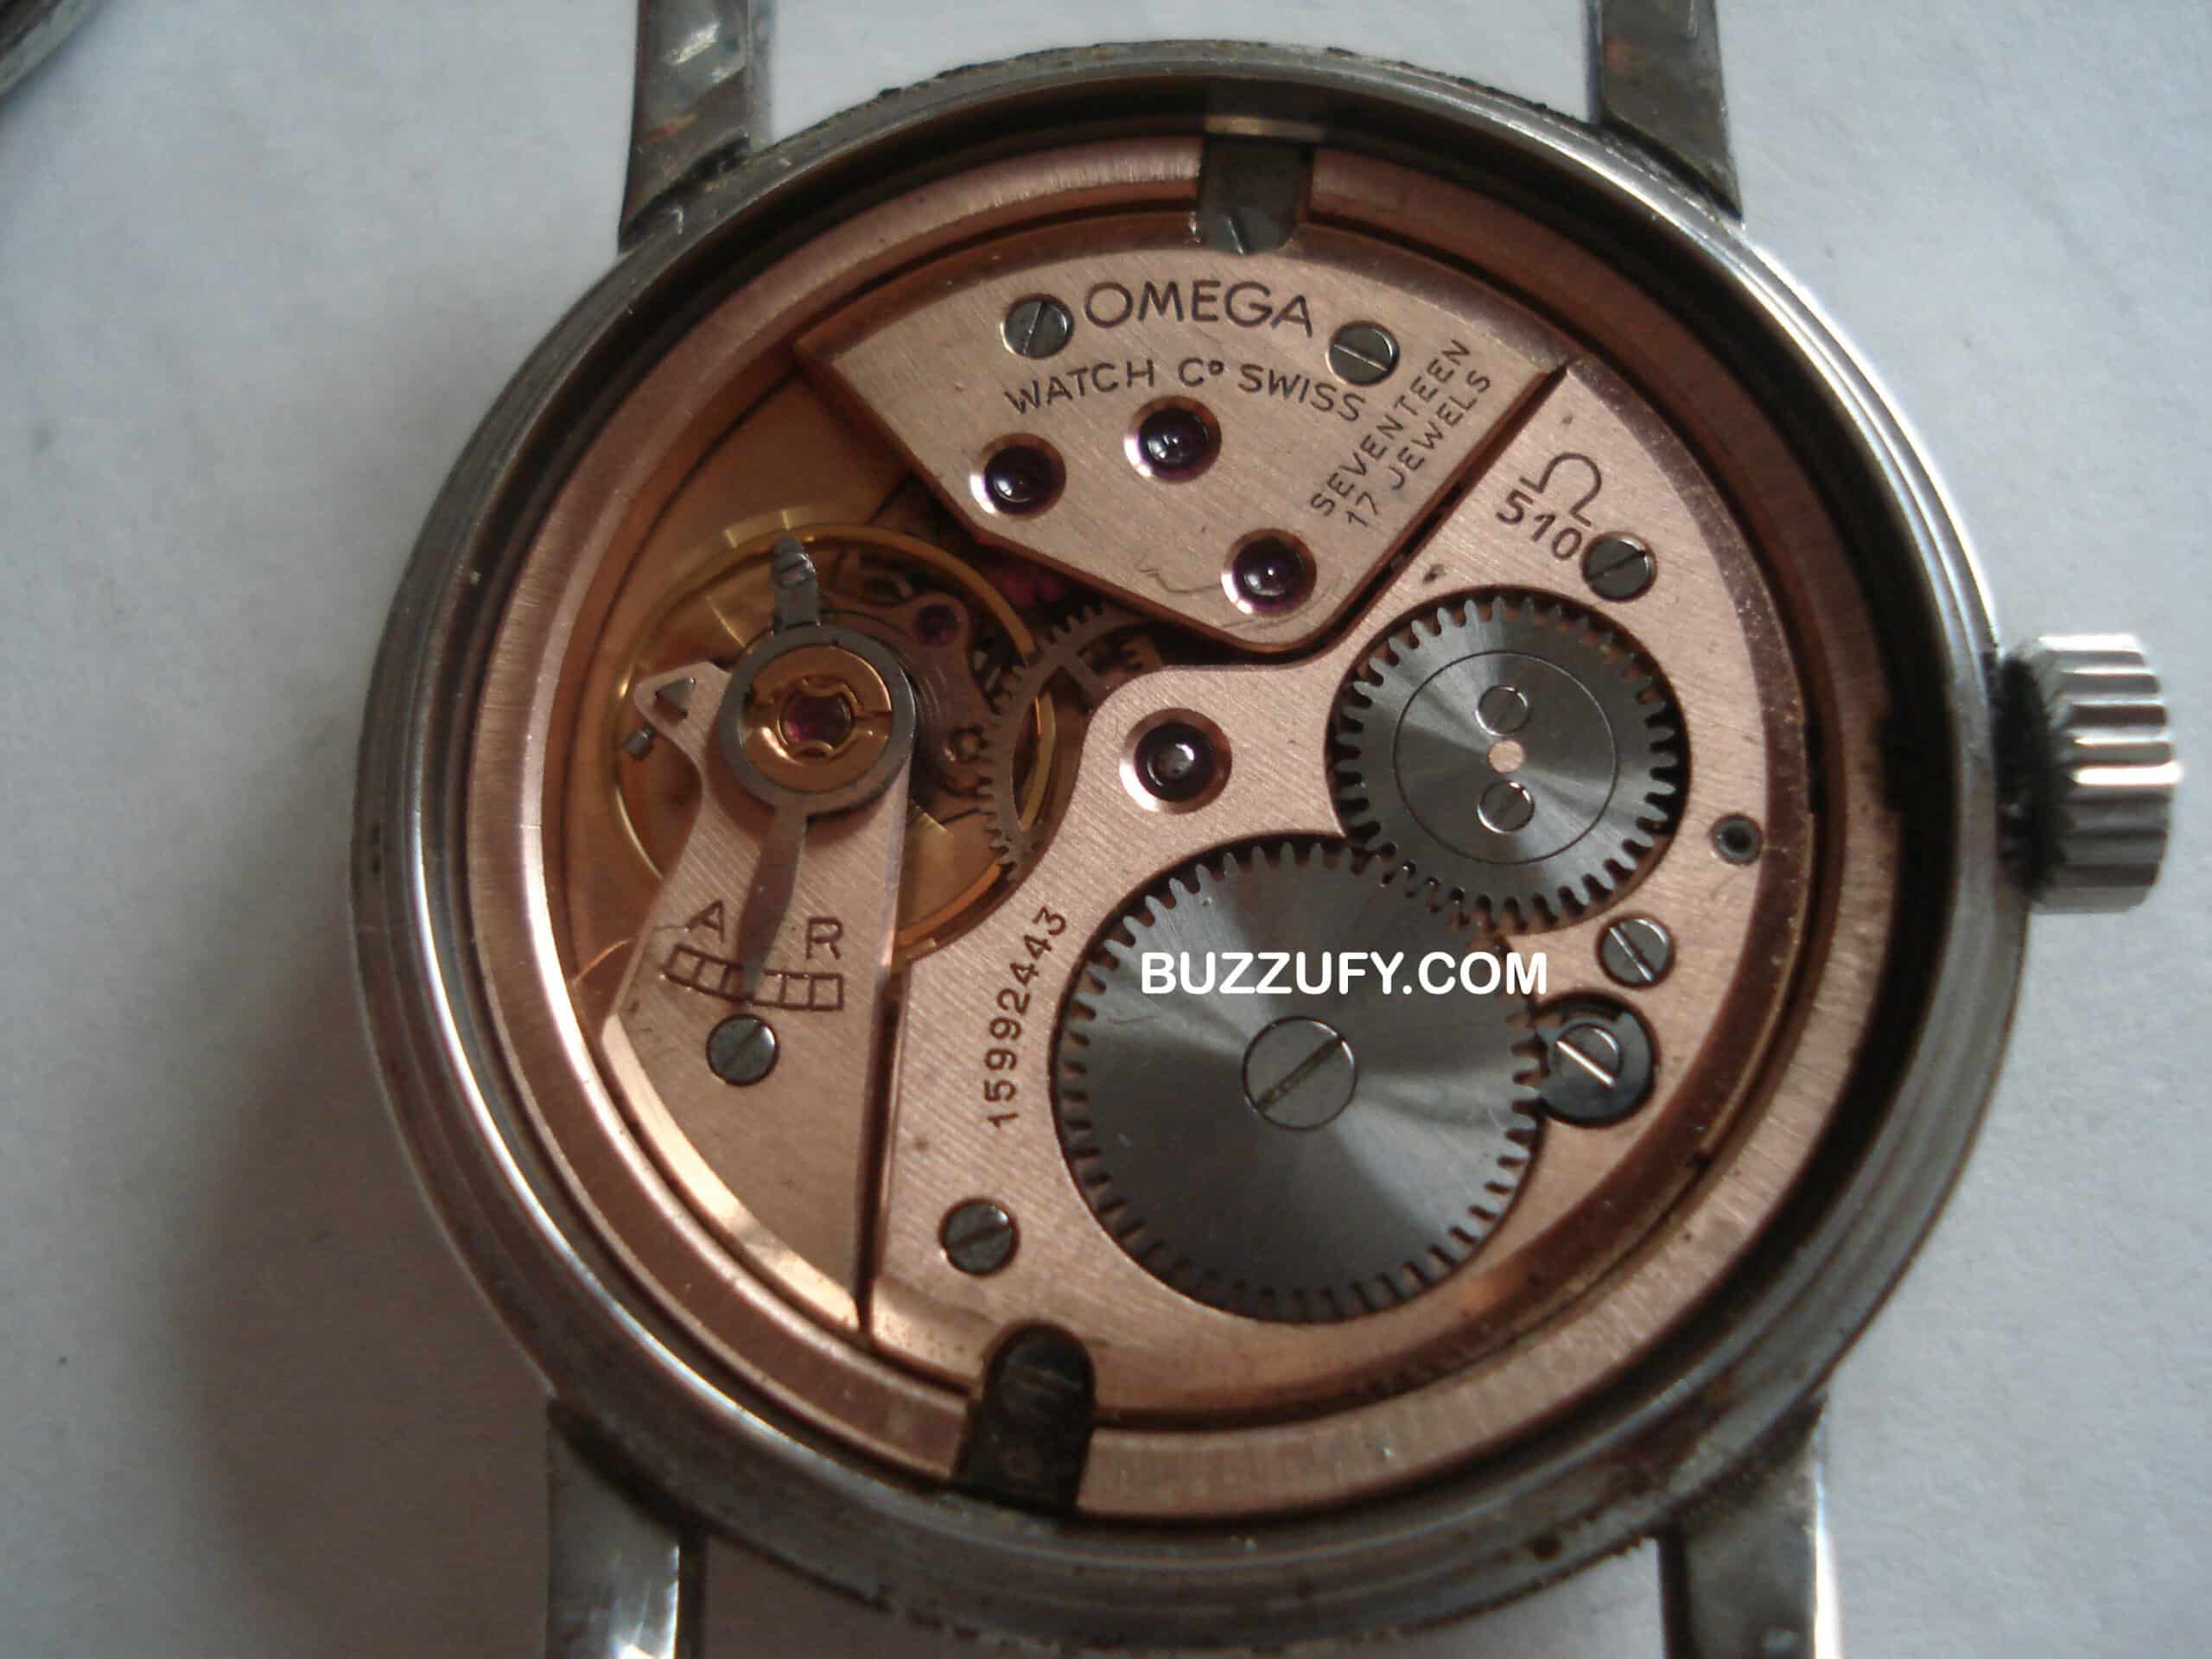 Omega cal. 510 movement specifications and photo